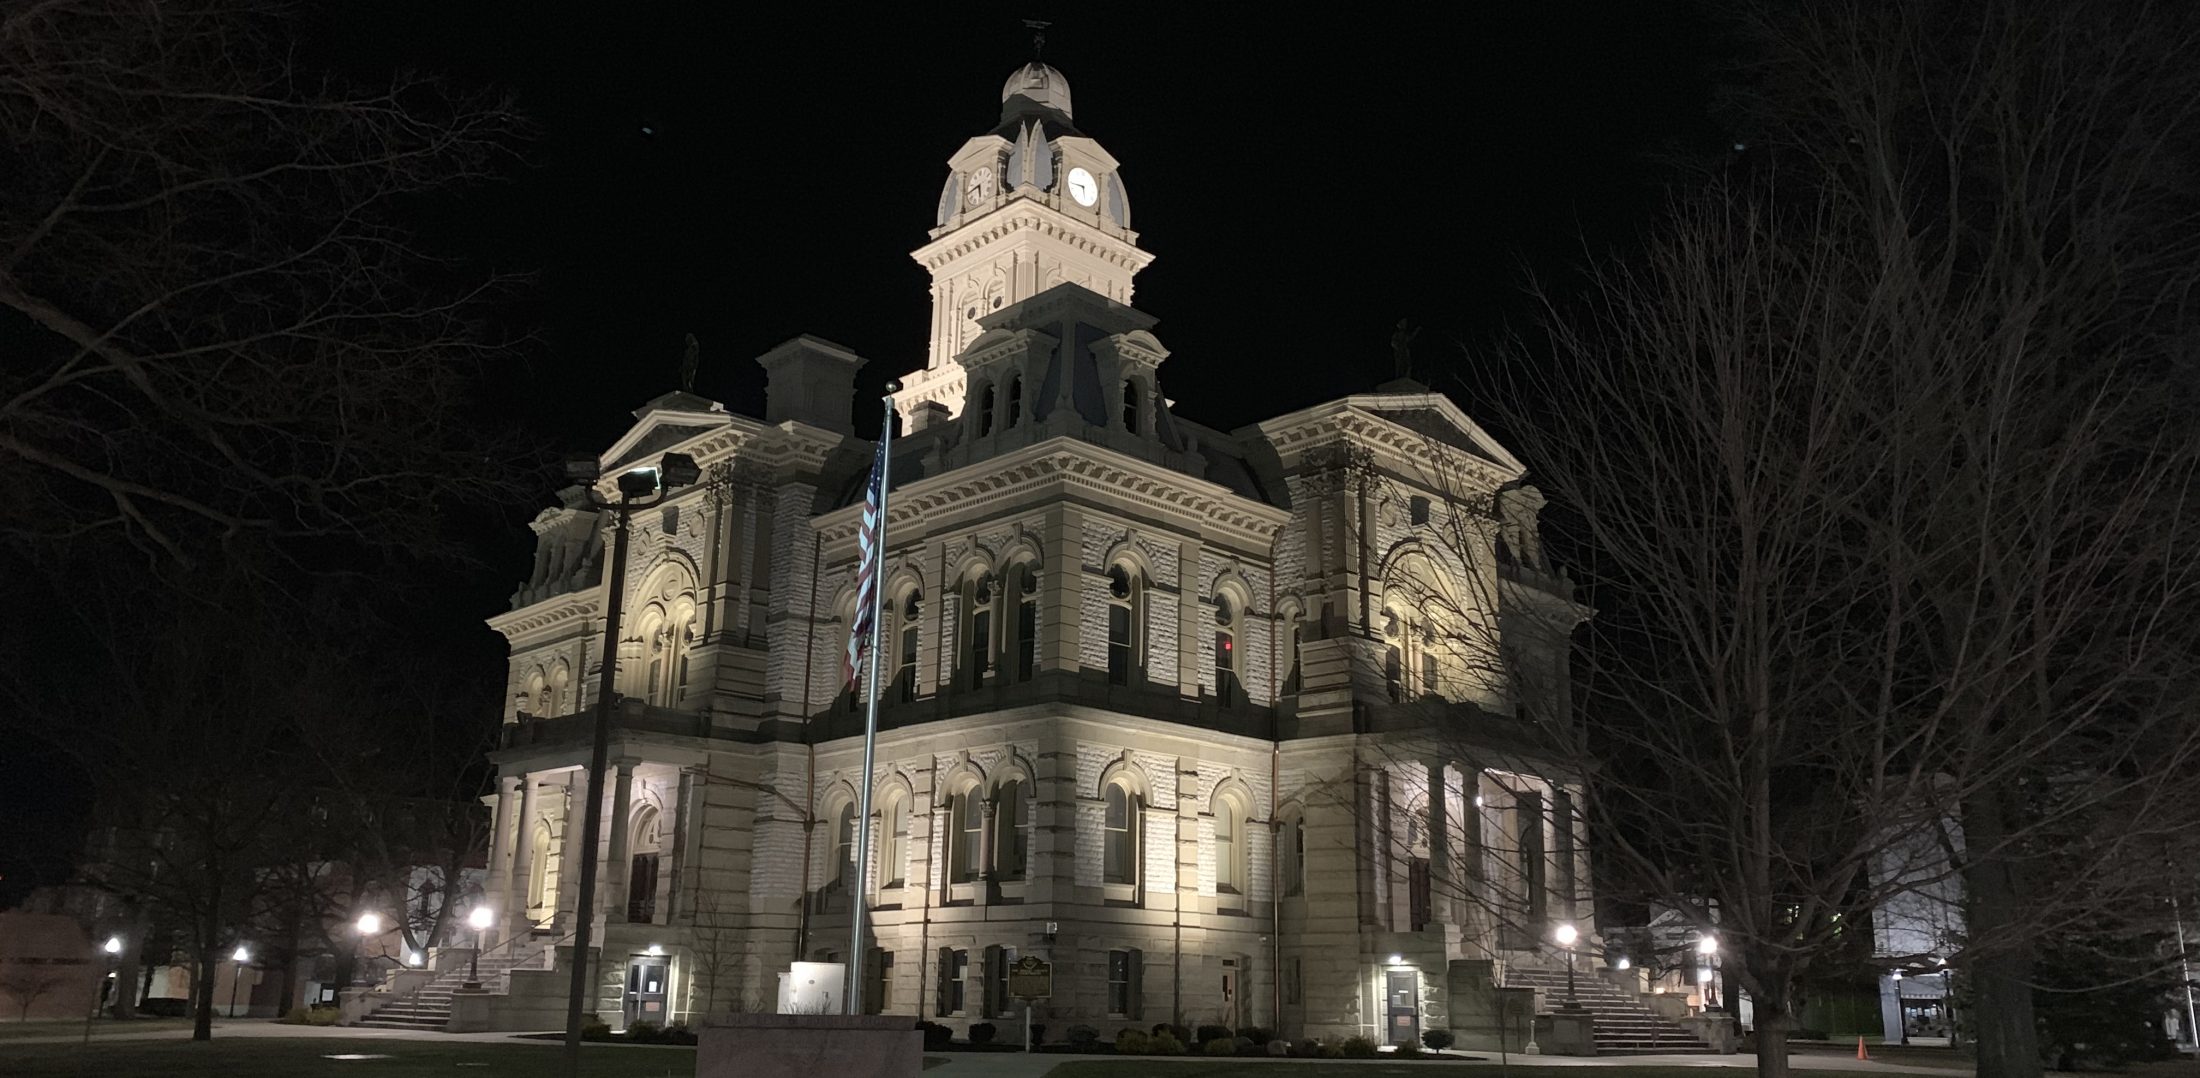 Shelby County courthouse